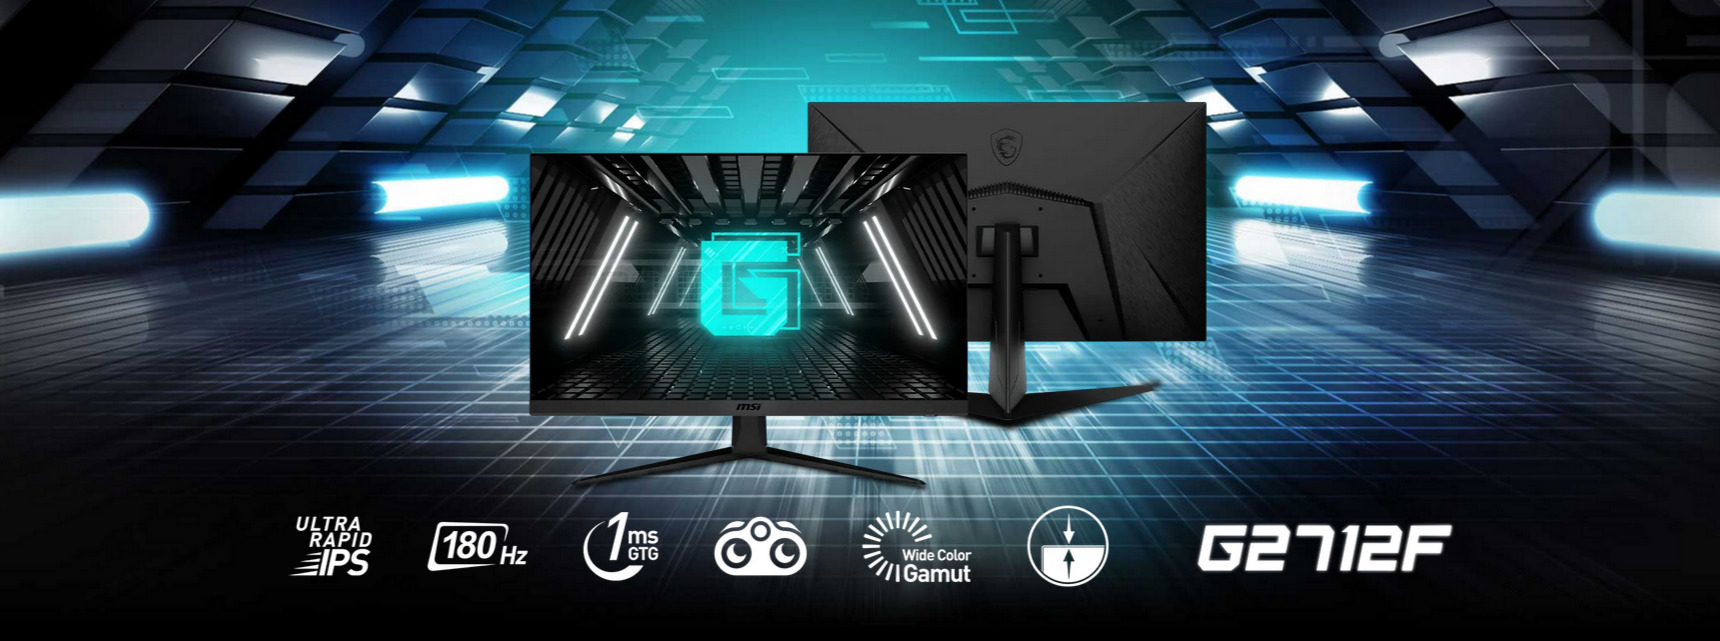 A large marketing image providing additional information about the product MSI G2712F 27" FHD 180Hz IPS Monitor - Additional alt info not provided